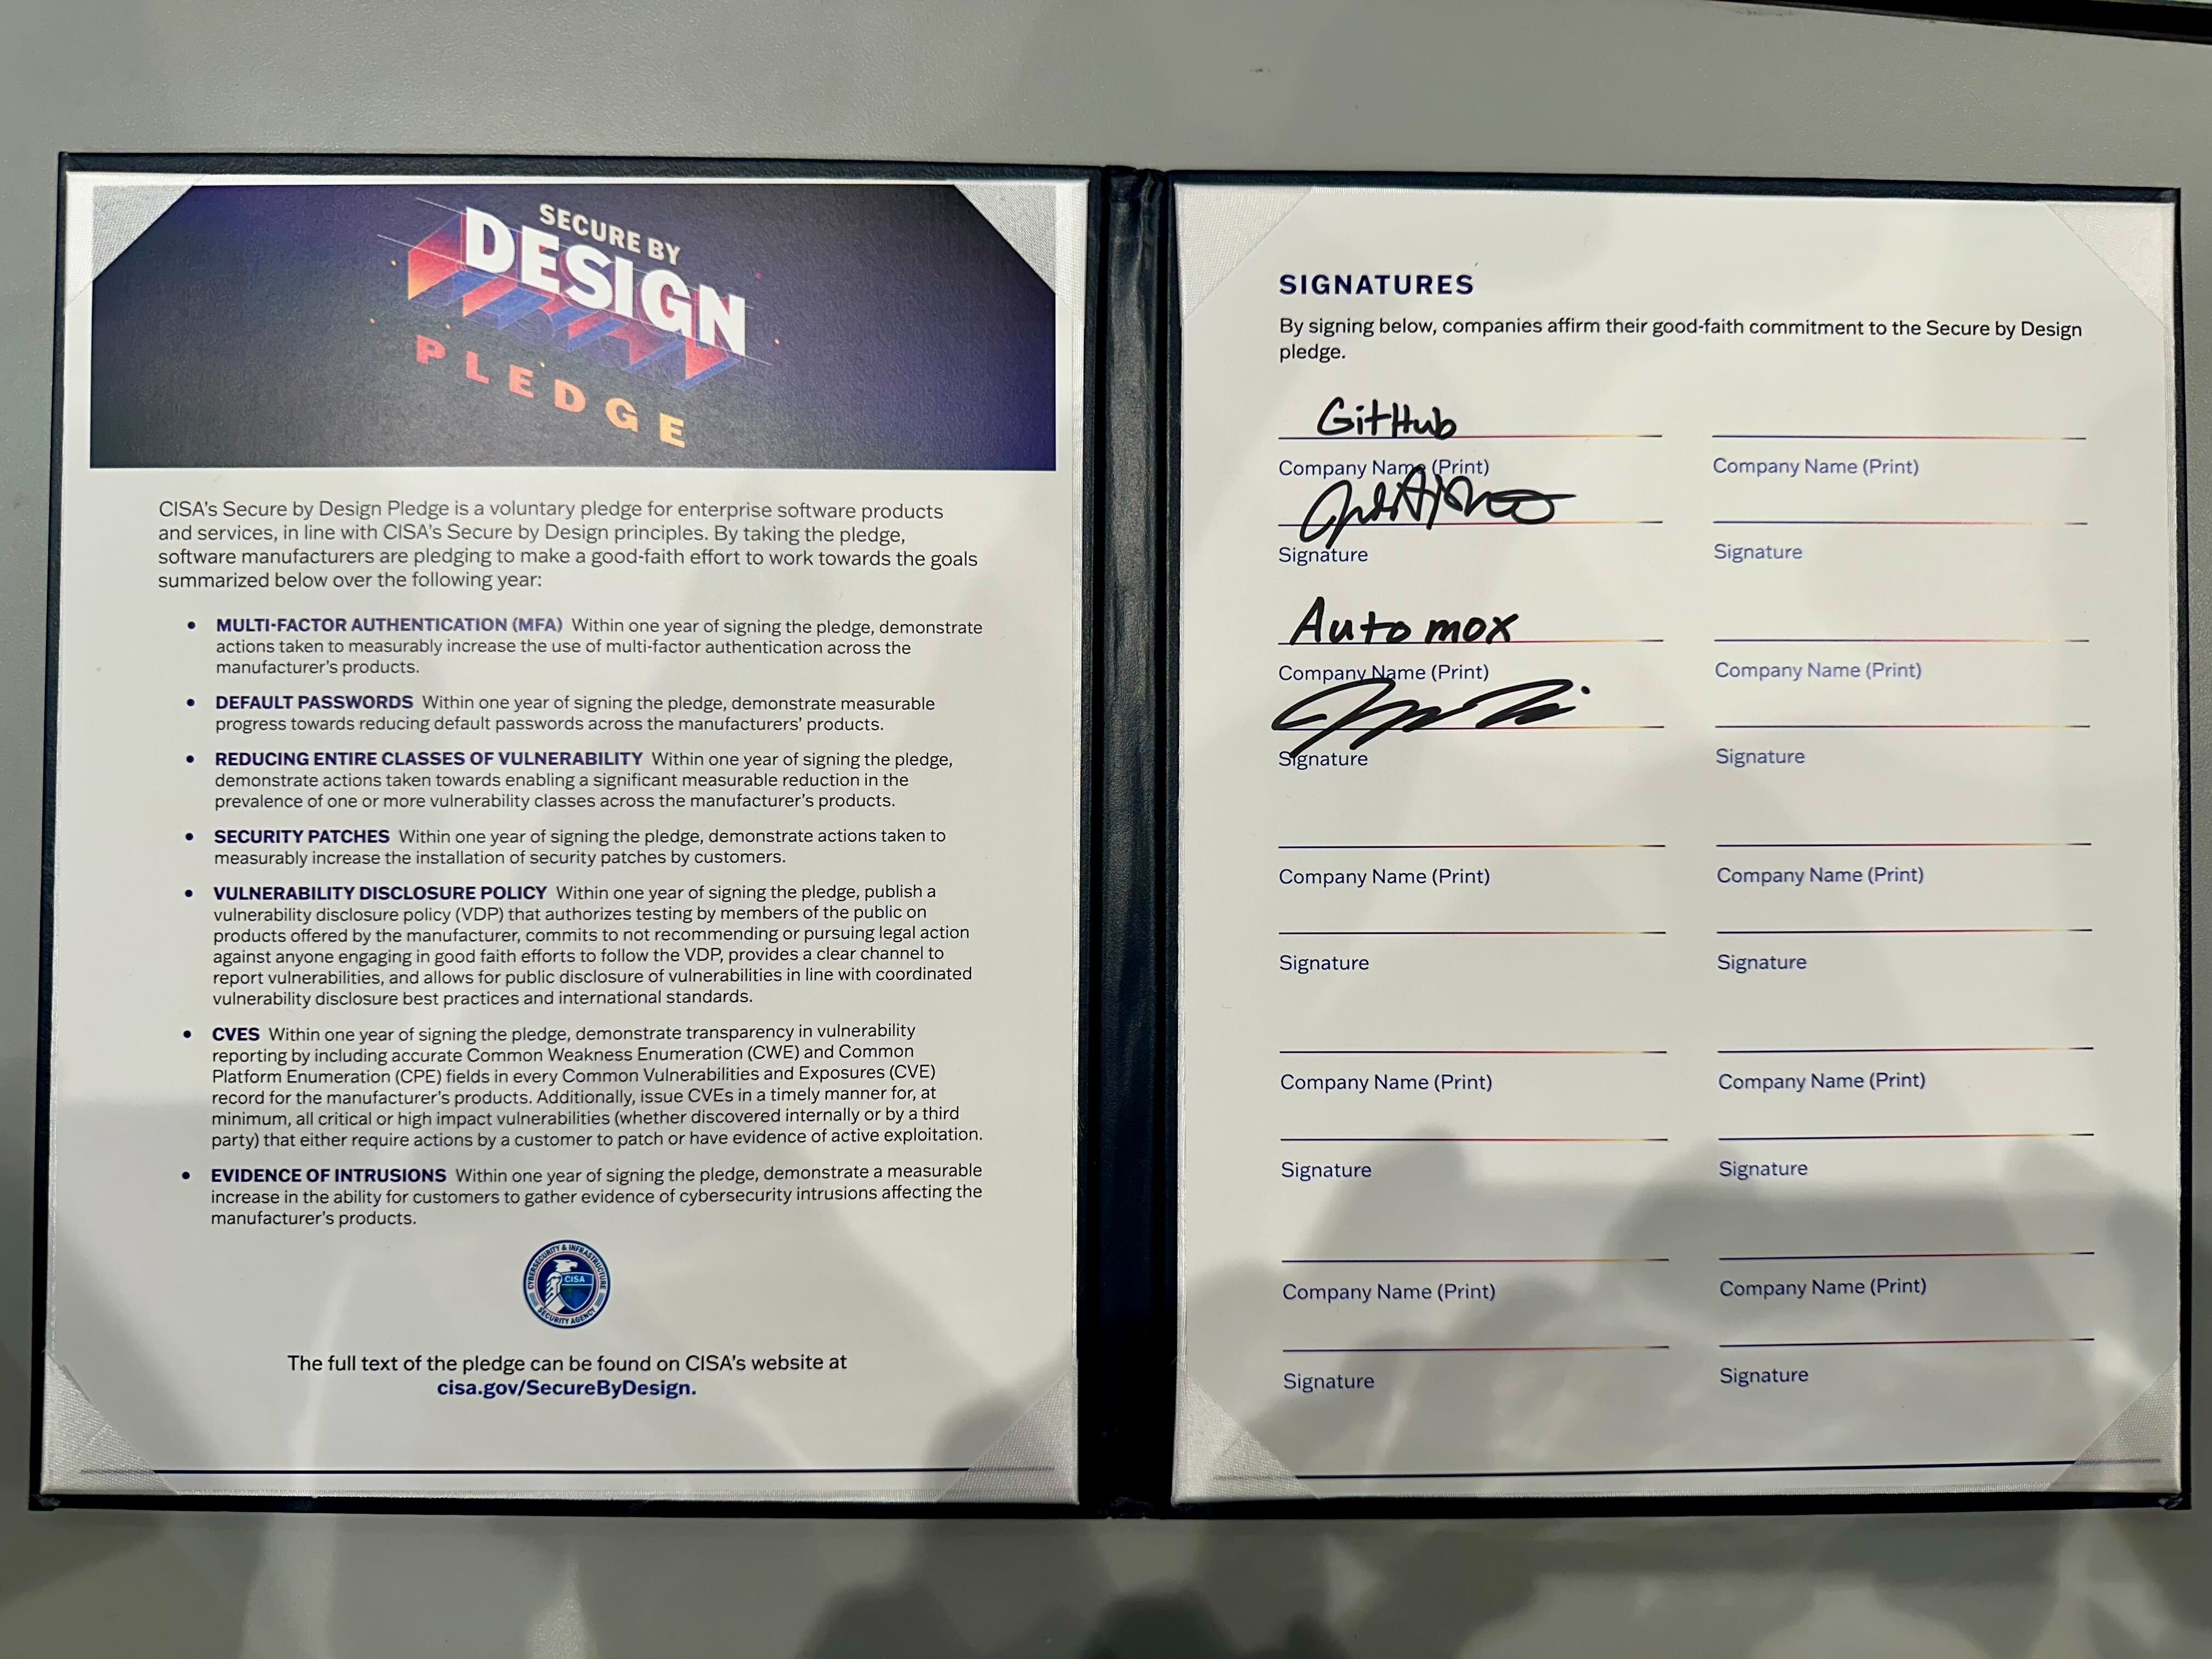 Jason Kikta, CISO/SVP Product of Automox proudly signed the CISA Secure by Design Pledge today at RSA Conference, Moscone Center, San Francisco